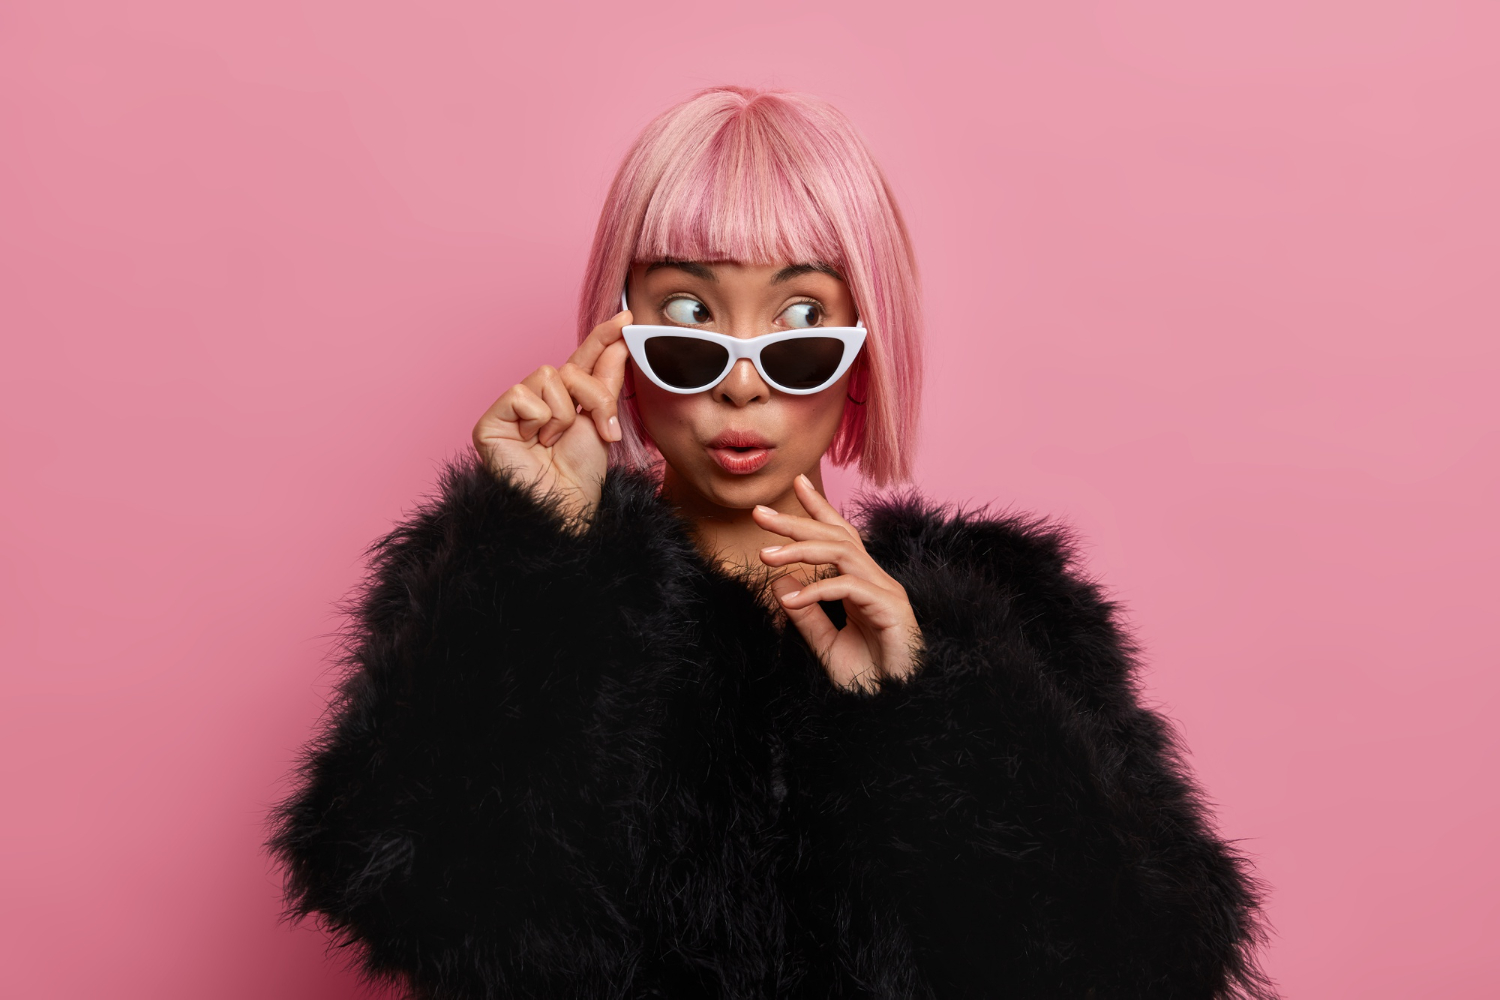 beautiful wondered millennial girl wears pink hair wig sunglasses black fluffy sweater scared see something surprising thrilling aside stands indoor rosy wall people style fashion